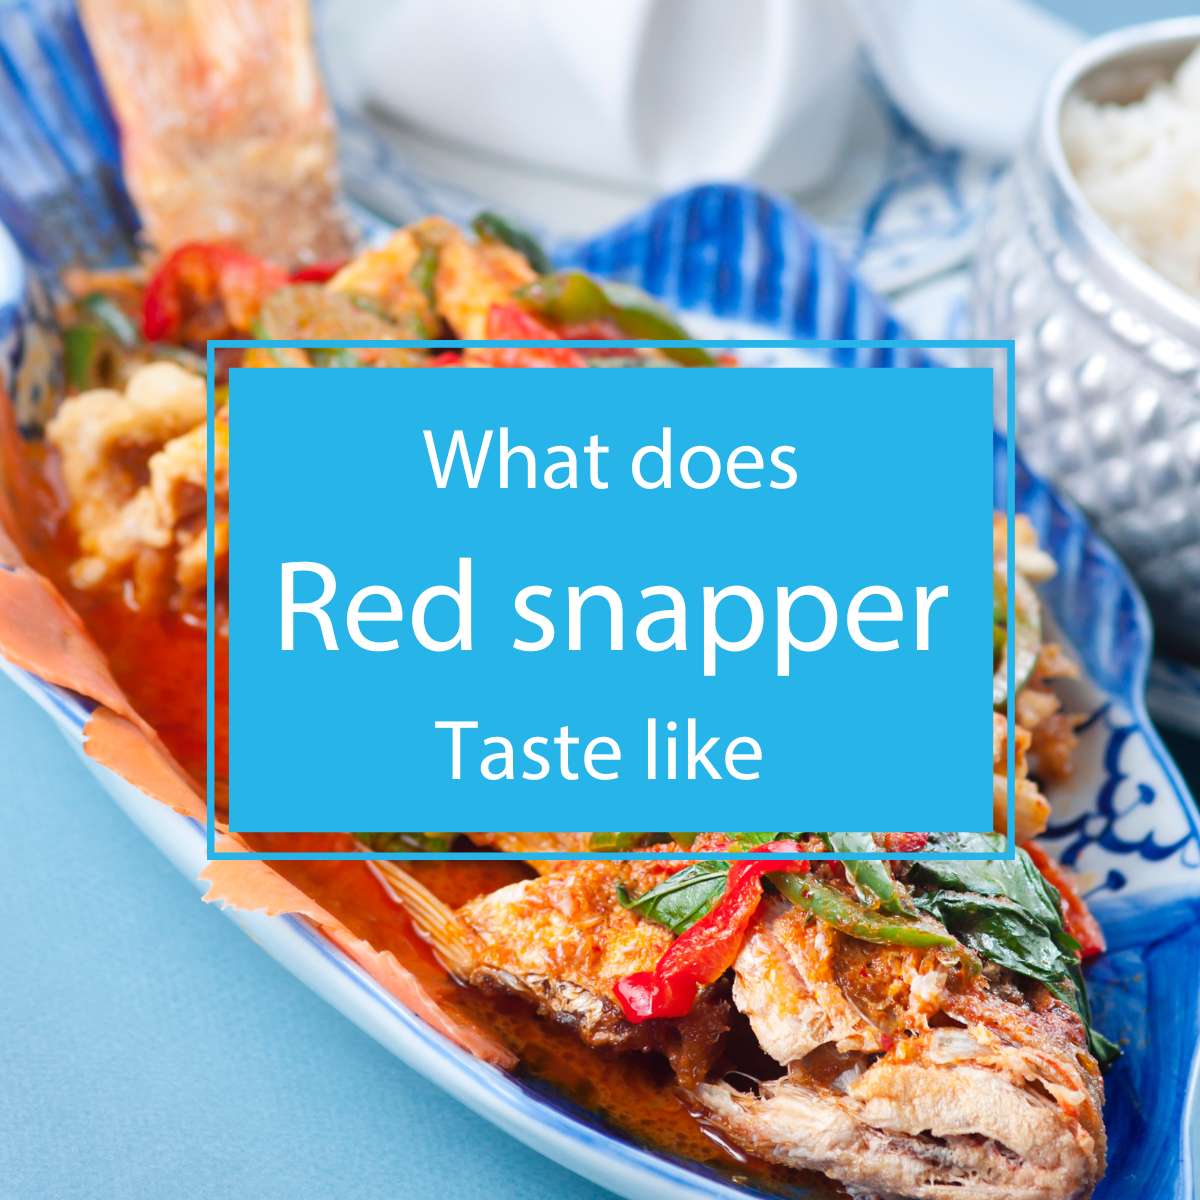 What does Red snapper taste like